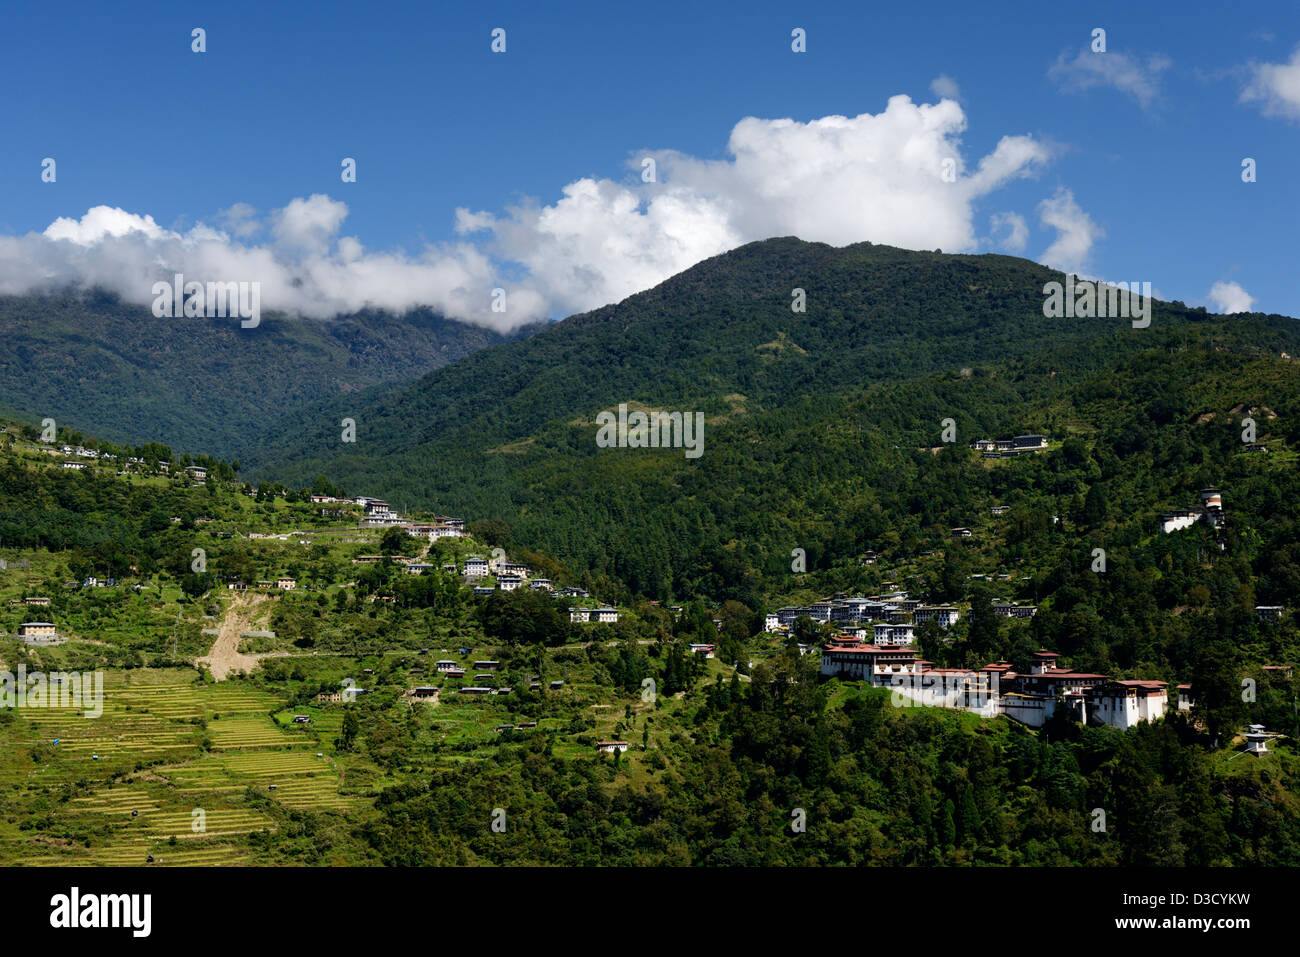 Trongsa Dzong,1644,2180m perched high above Mangde Chuu river,Amazing landscape view of mountains,terraced farmland,36MPX,HI-RES Stock Photo